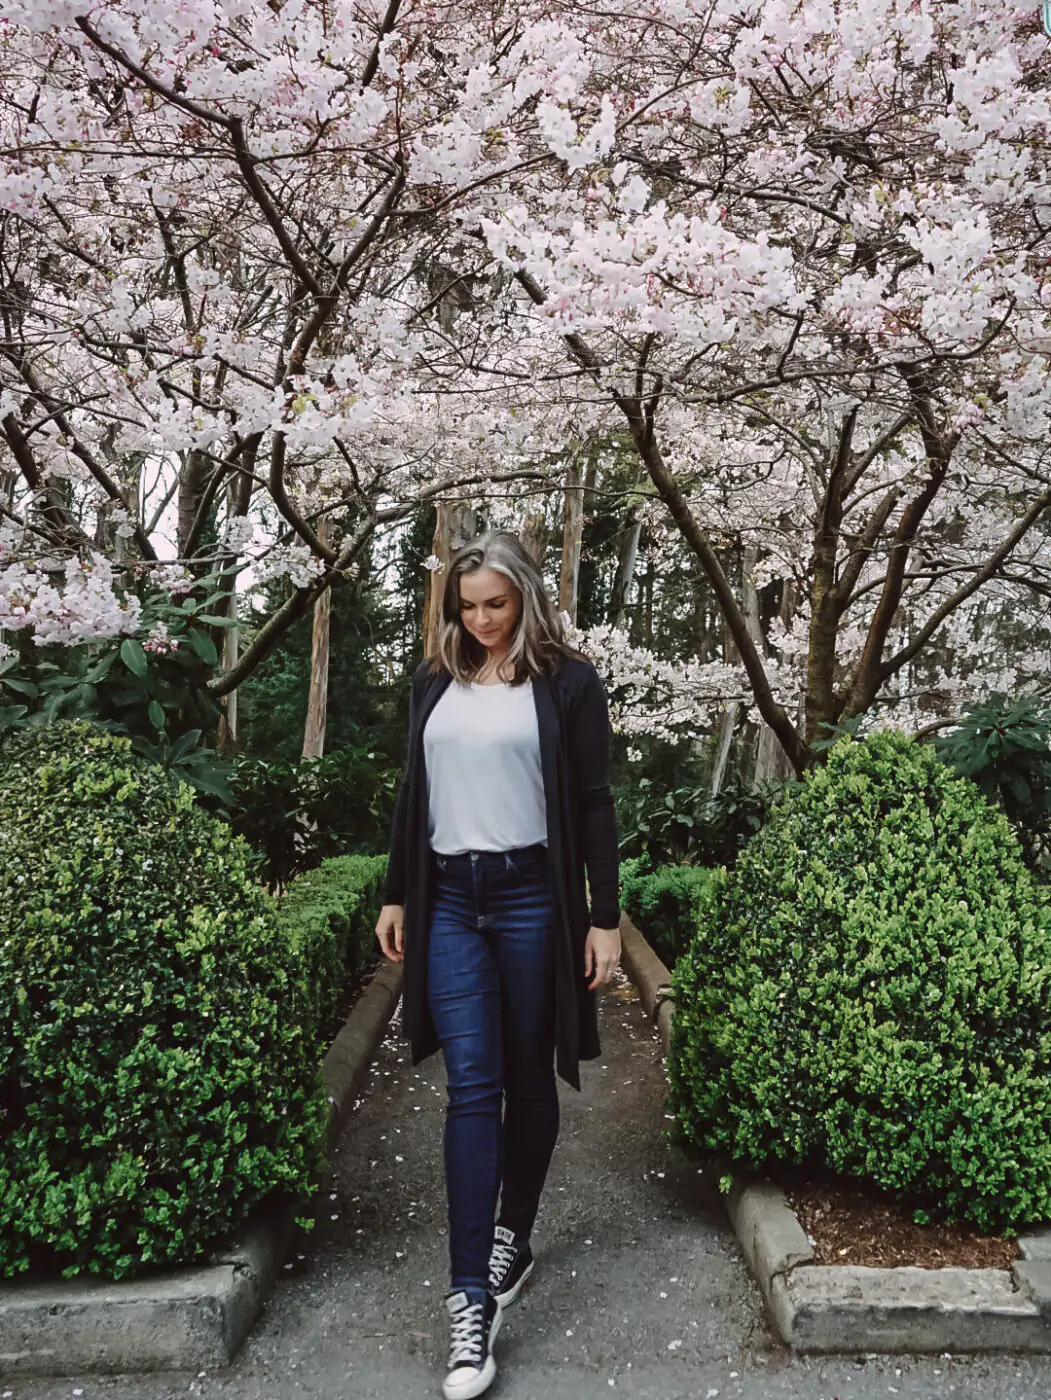 Walking through the Cherry Blossoms in San Francisco.